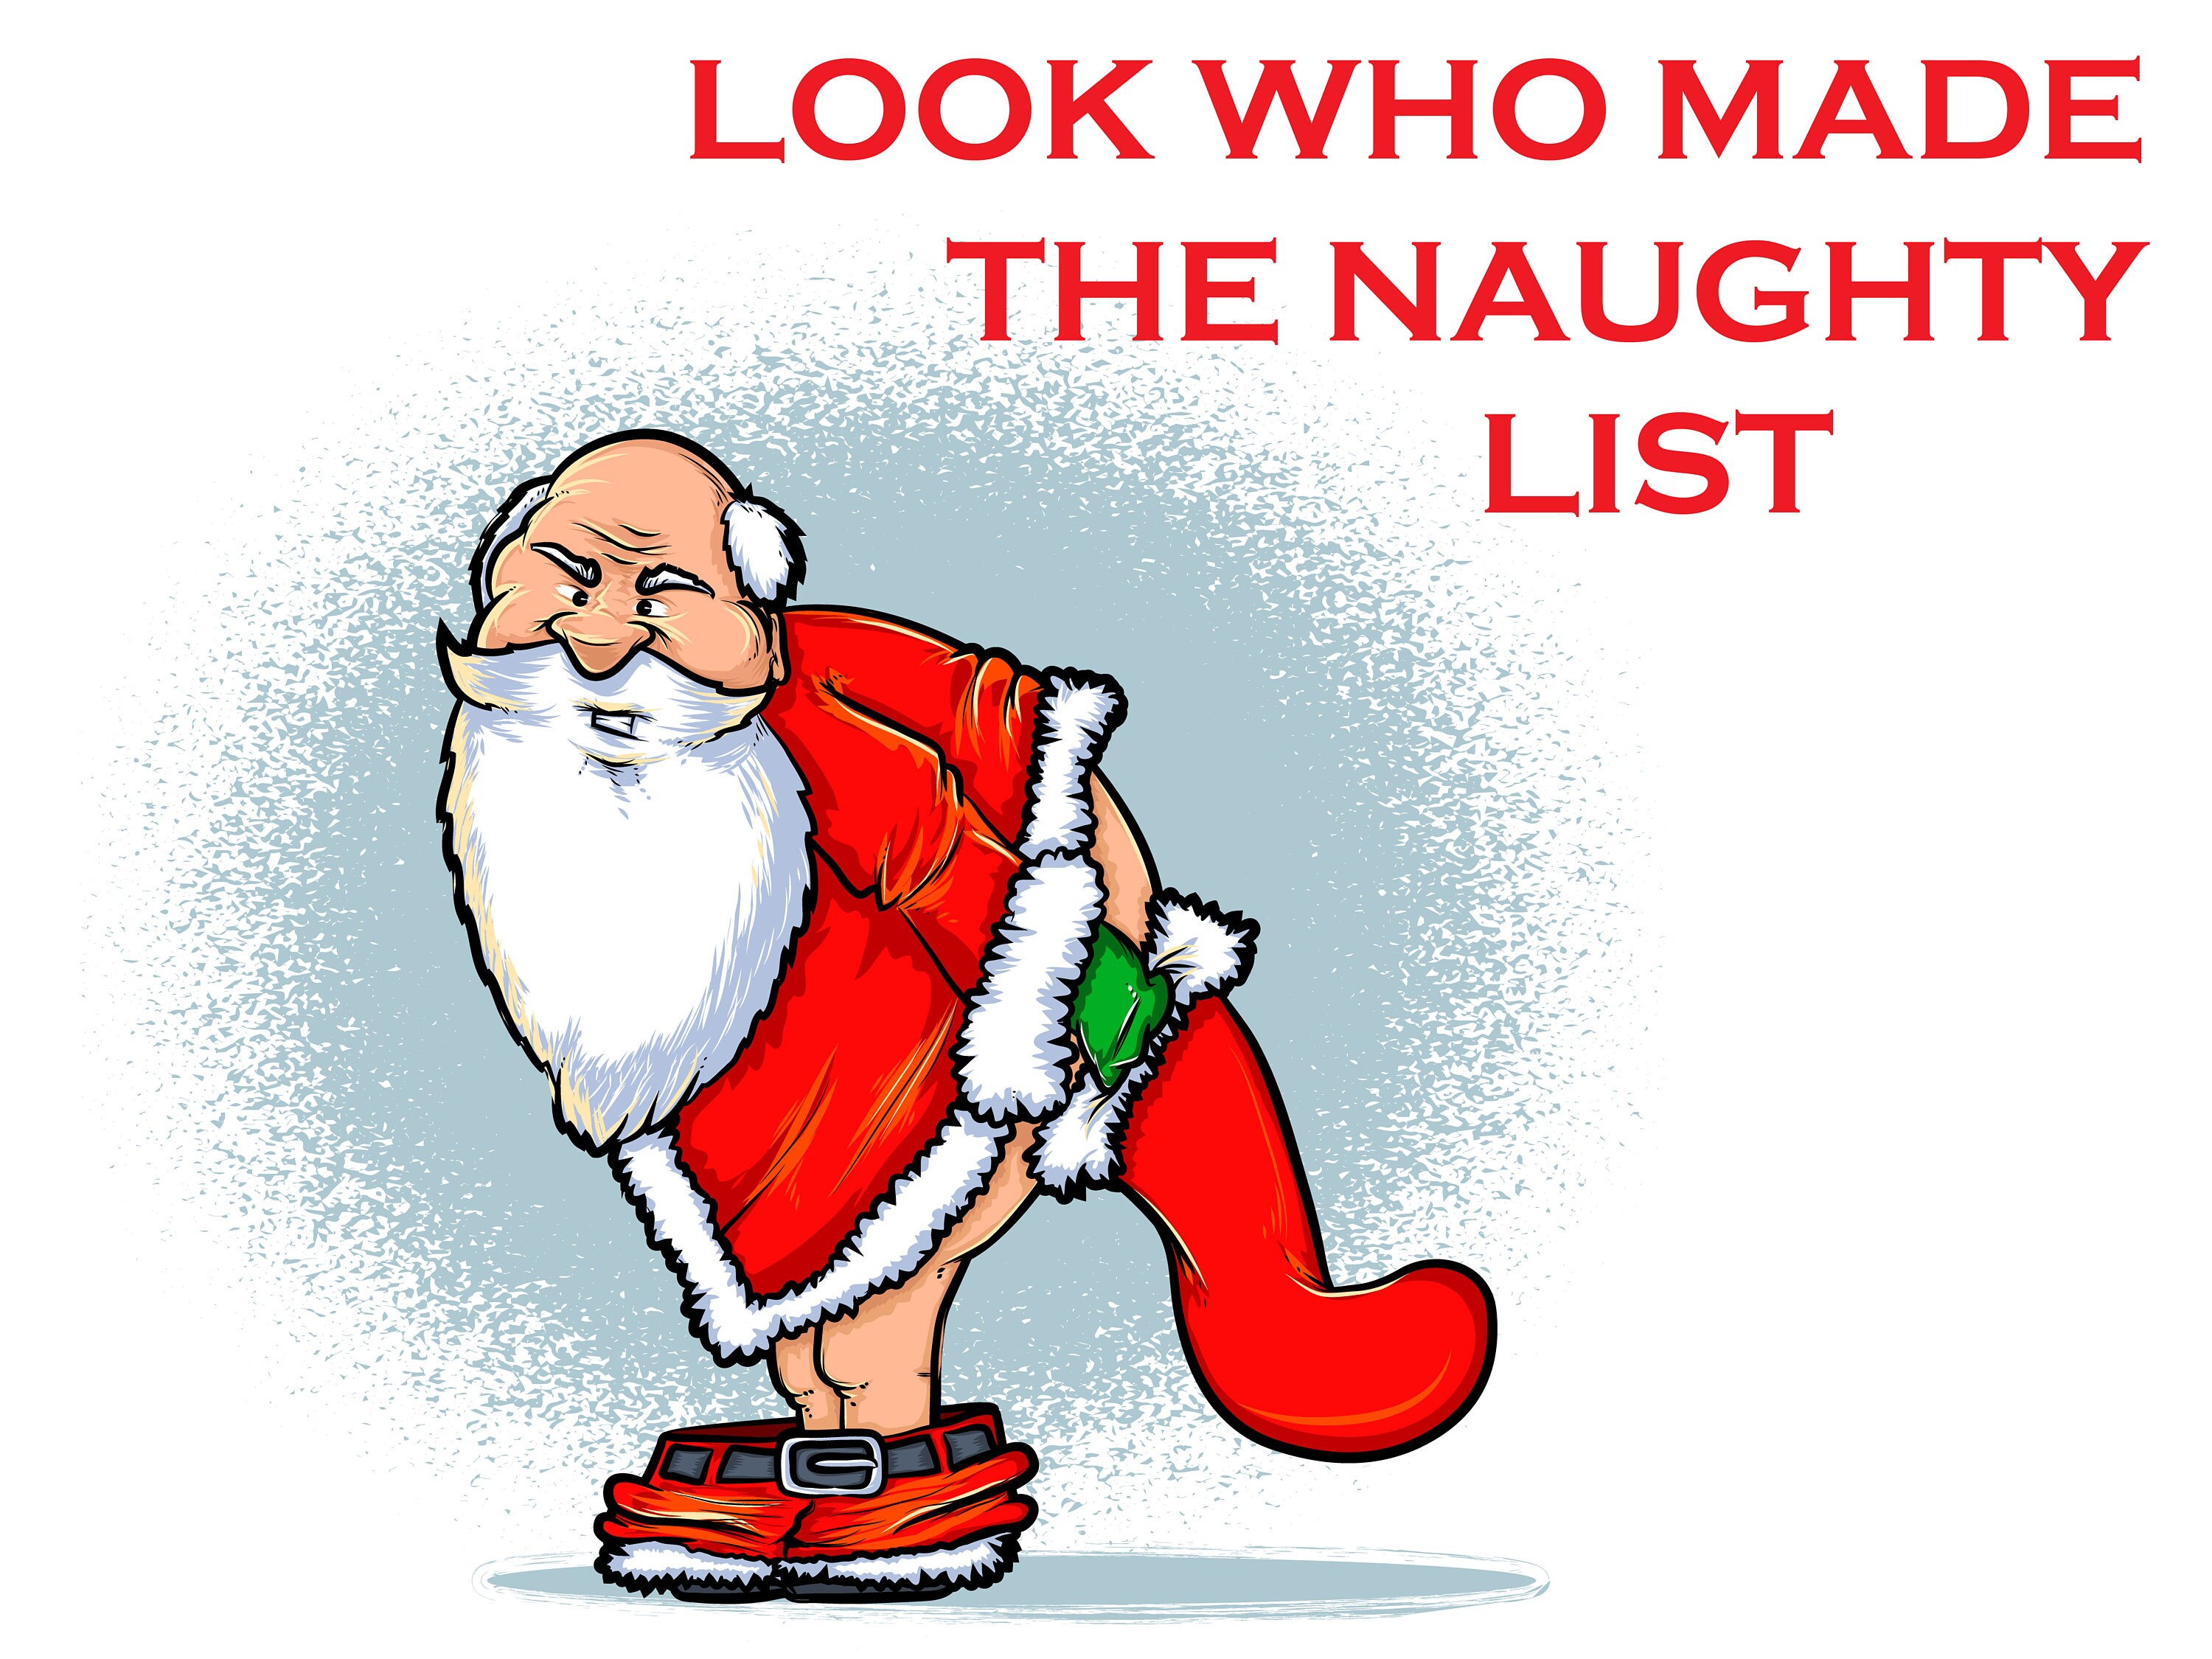 10 Troublemakers Who Belong On Santa's Naughty List This Year